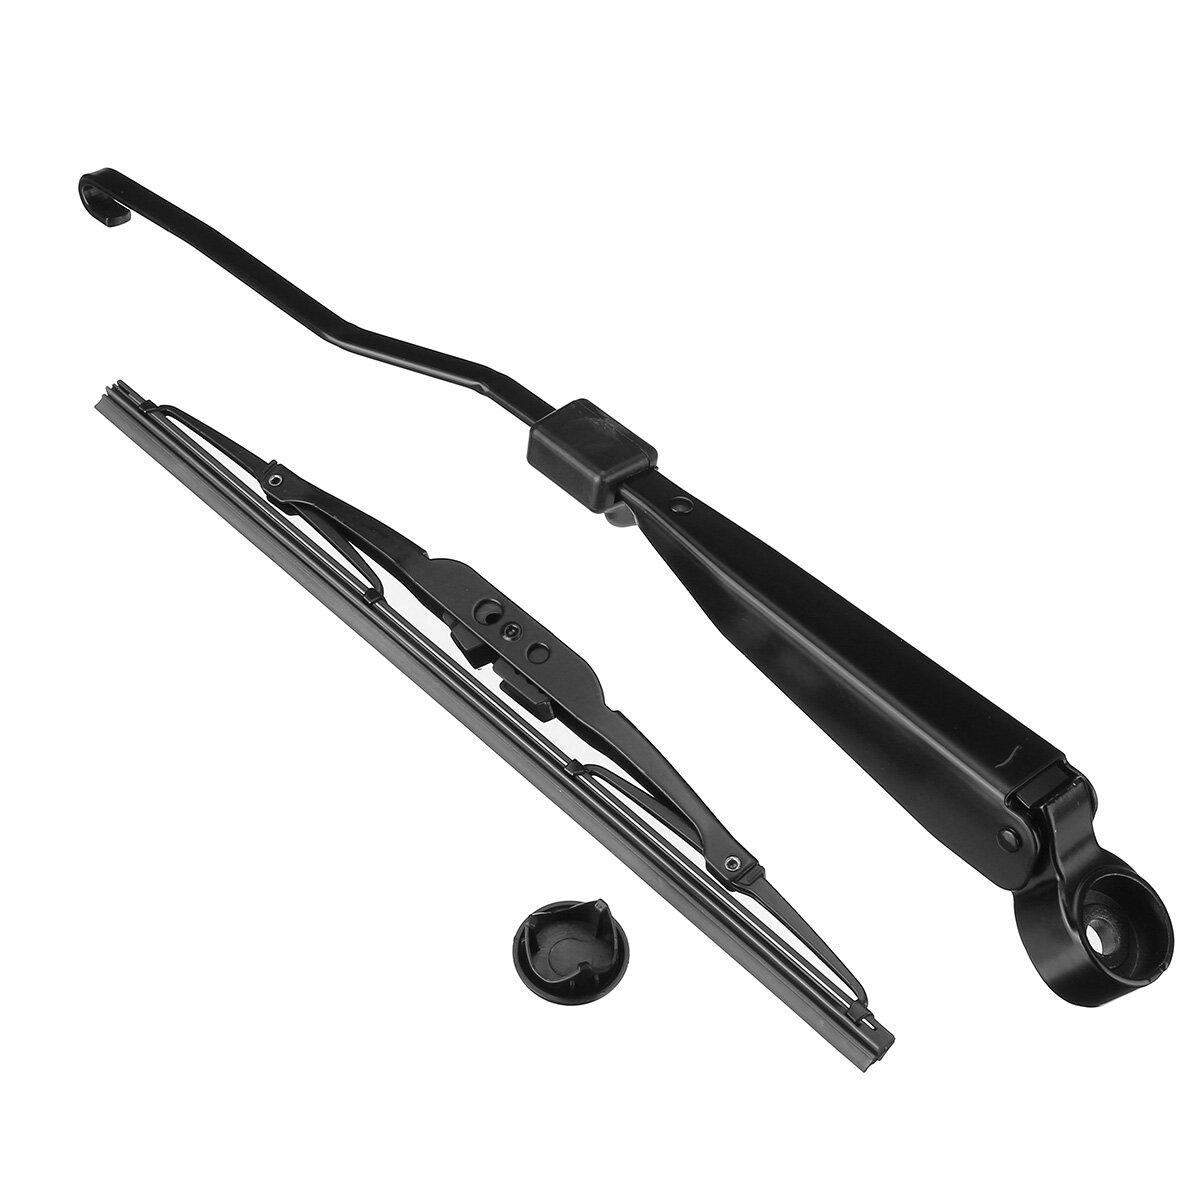 Car rear wiper arm with blade set for jeep grand cherokee 1999-2004 Sale - Banggood.com 2004 Jeep Grand Cherokee Rear Wiper Size